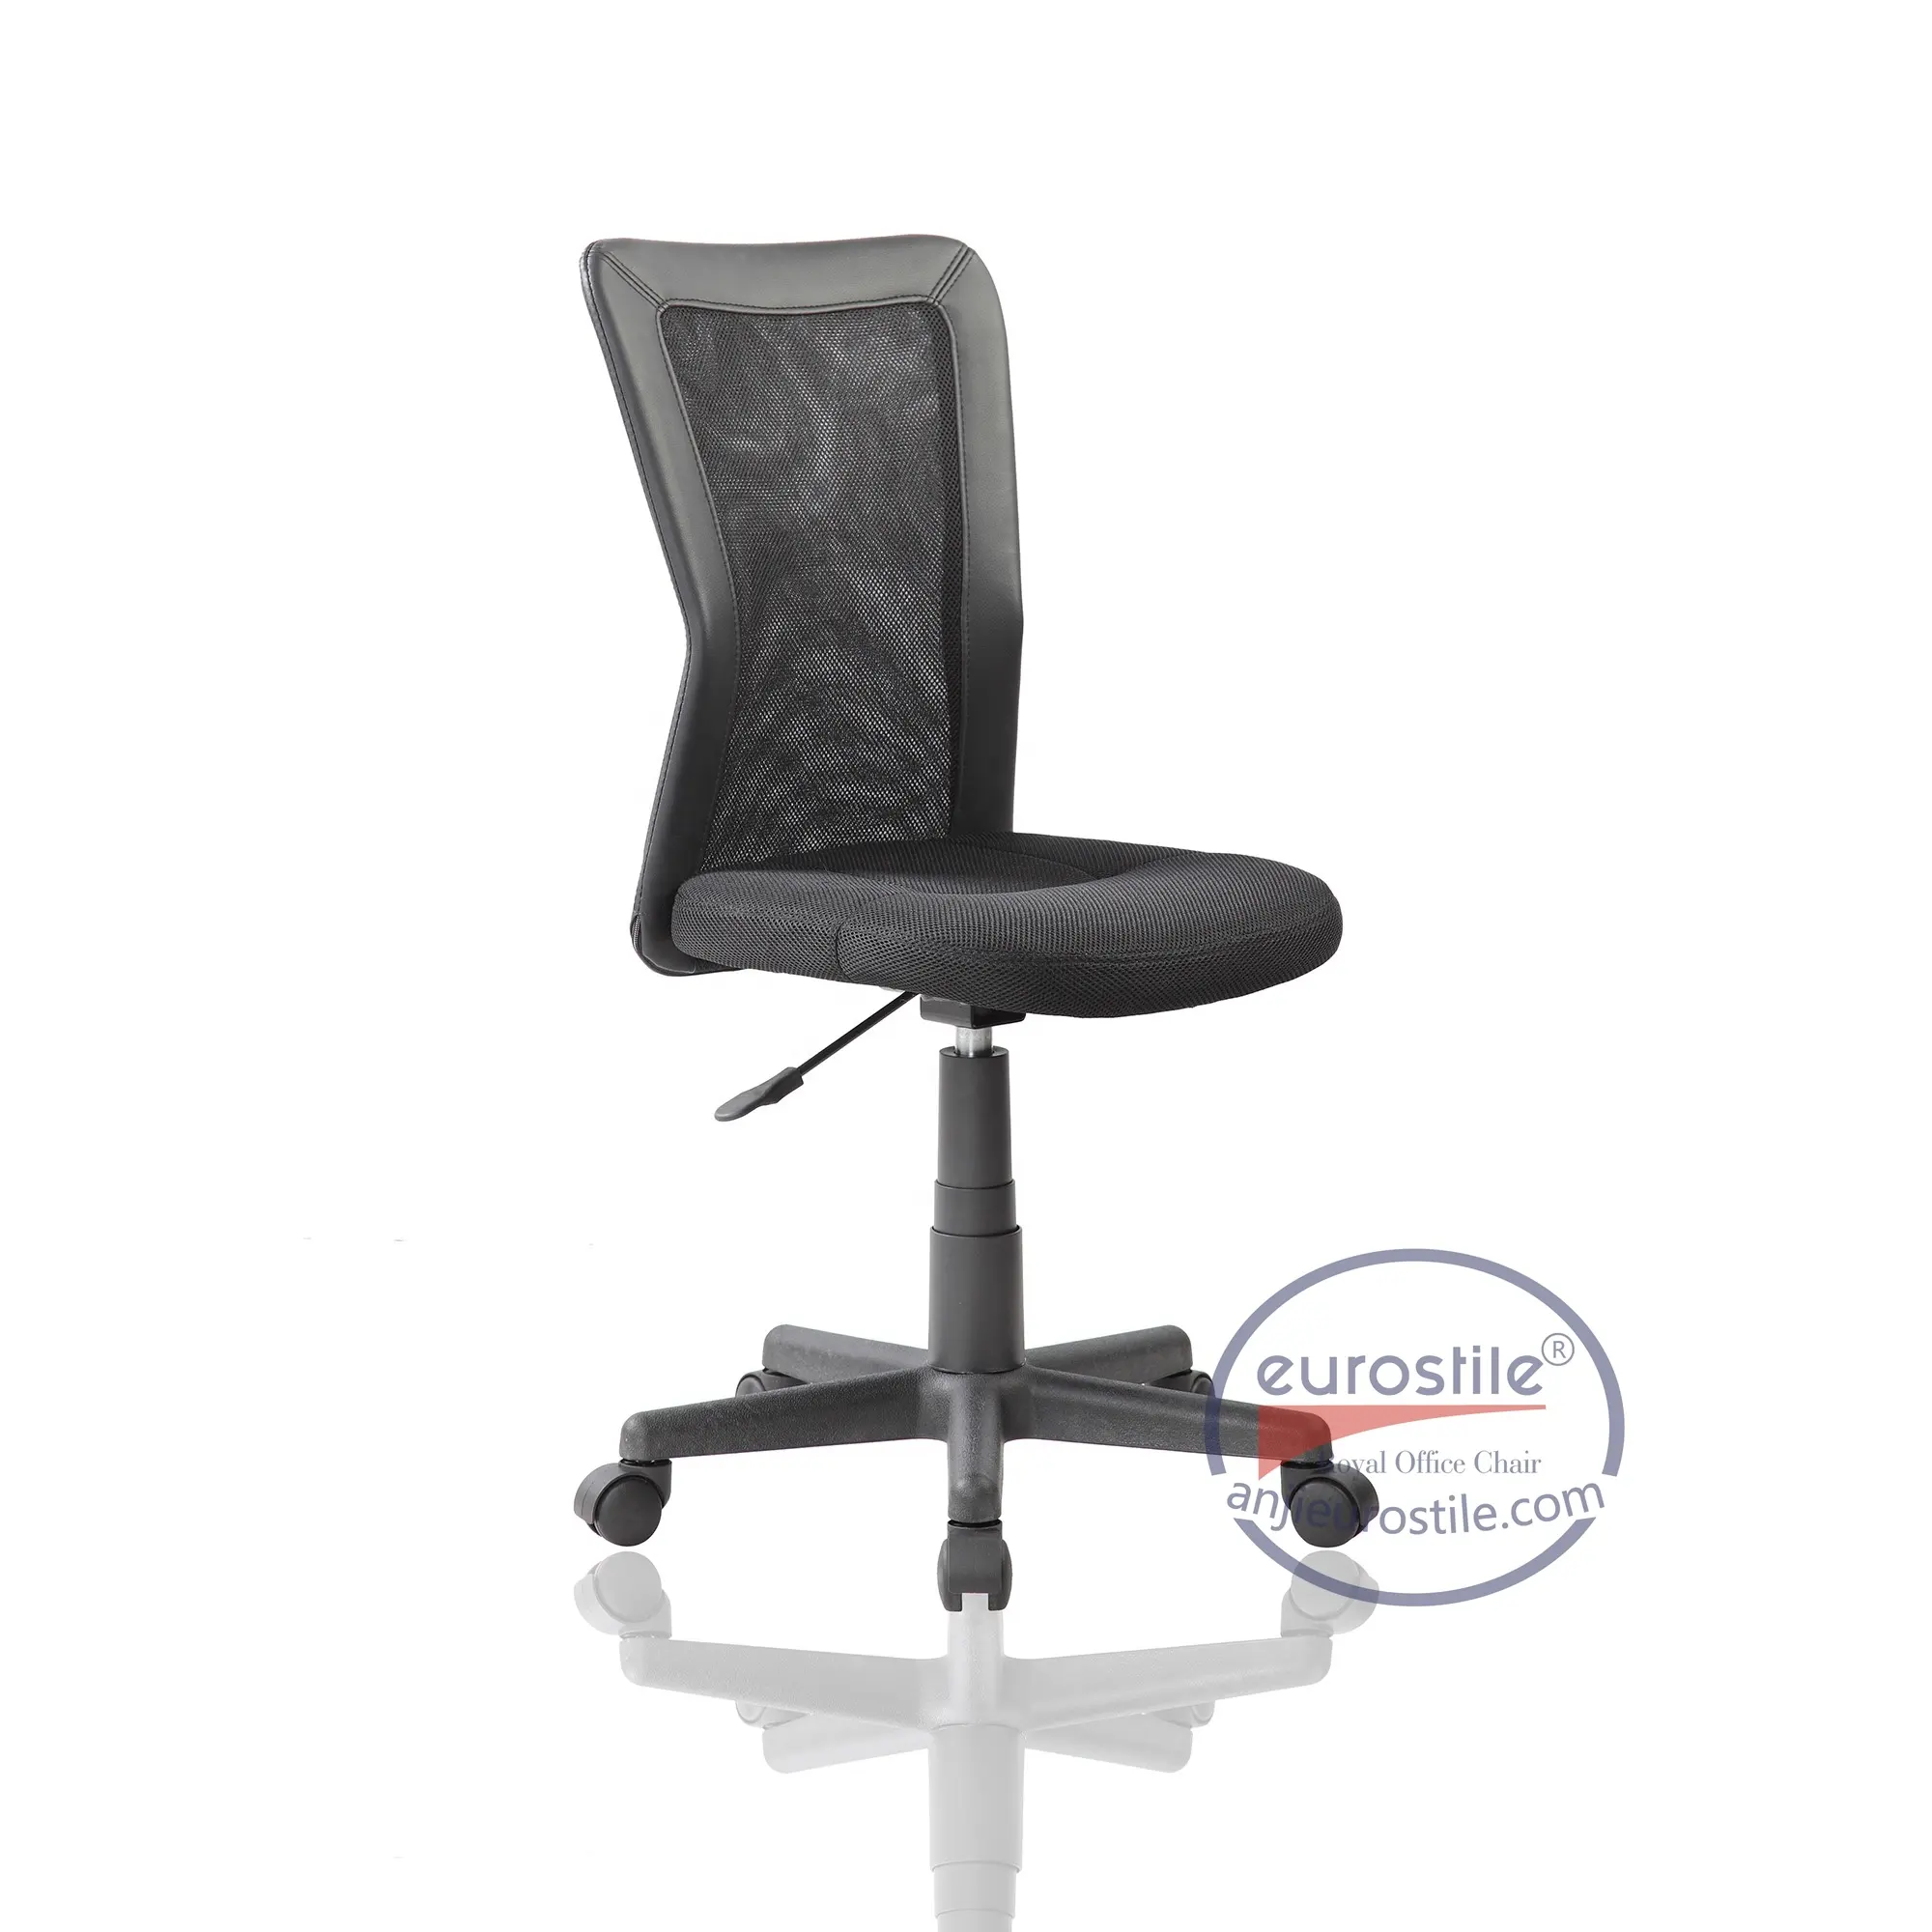 Eurostile 2022 World Class Most Popular Simple Armless Light Mid-Back Cooling Breathable Office Mesh Task Chair Office Chair